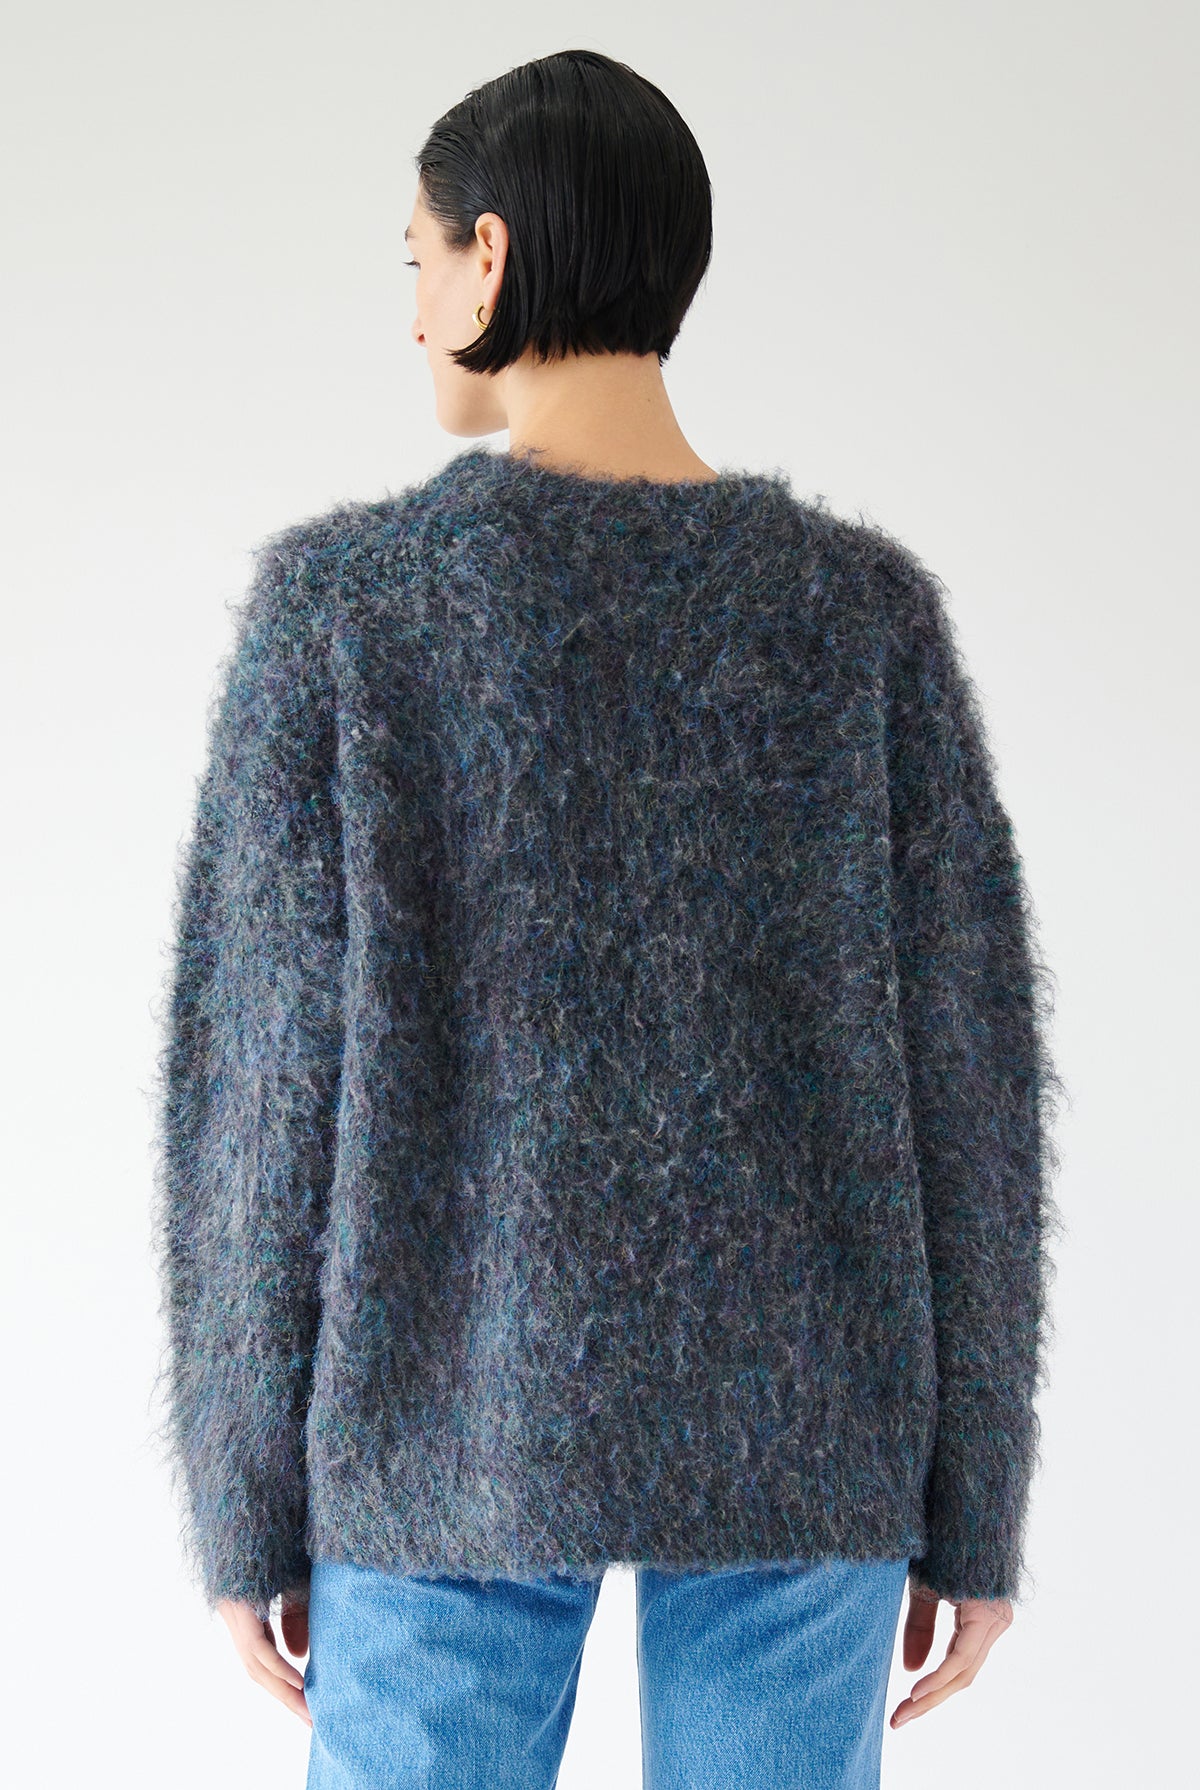 The back view of a woman wearing a Valencia sweater by Velvet by Jenny Graham in a vibrant blue, showcasing its versatility and stylish addition to any wardrobe.-35547899527361